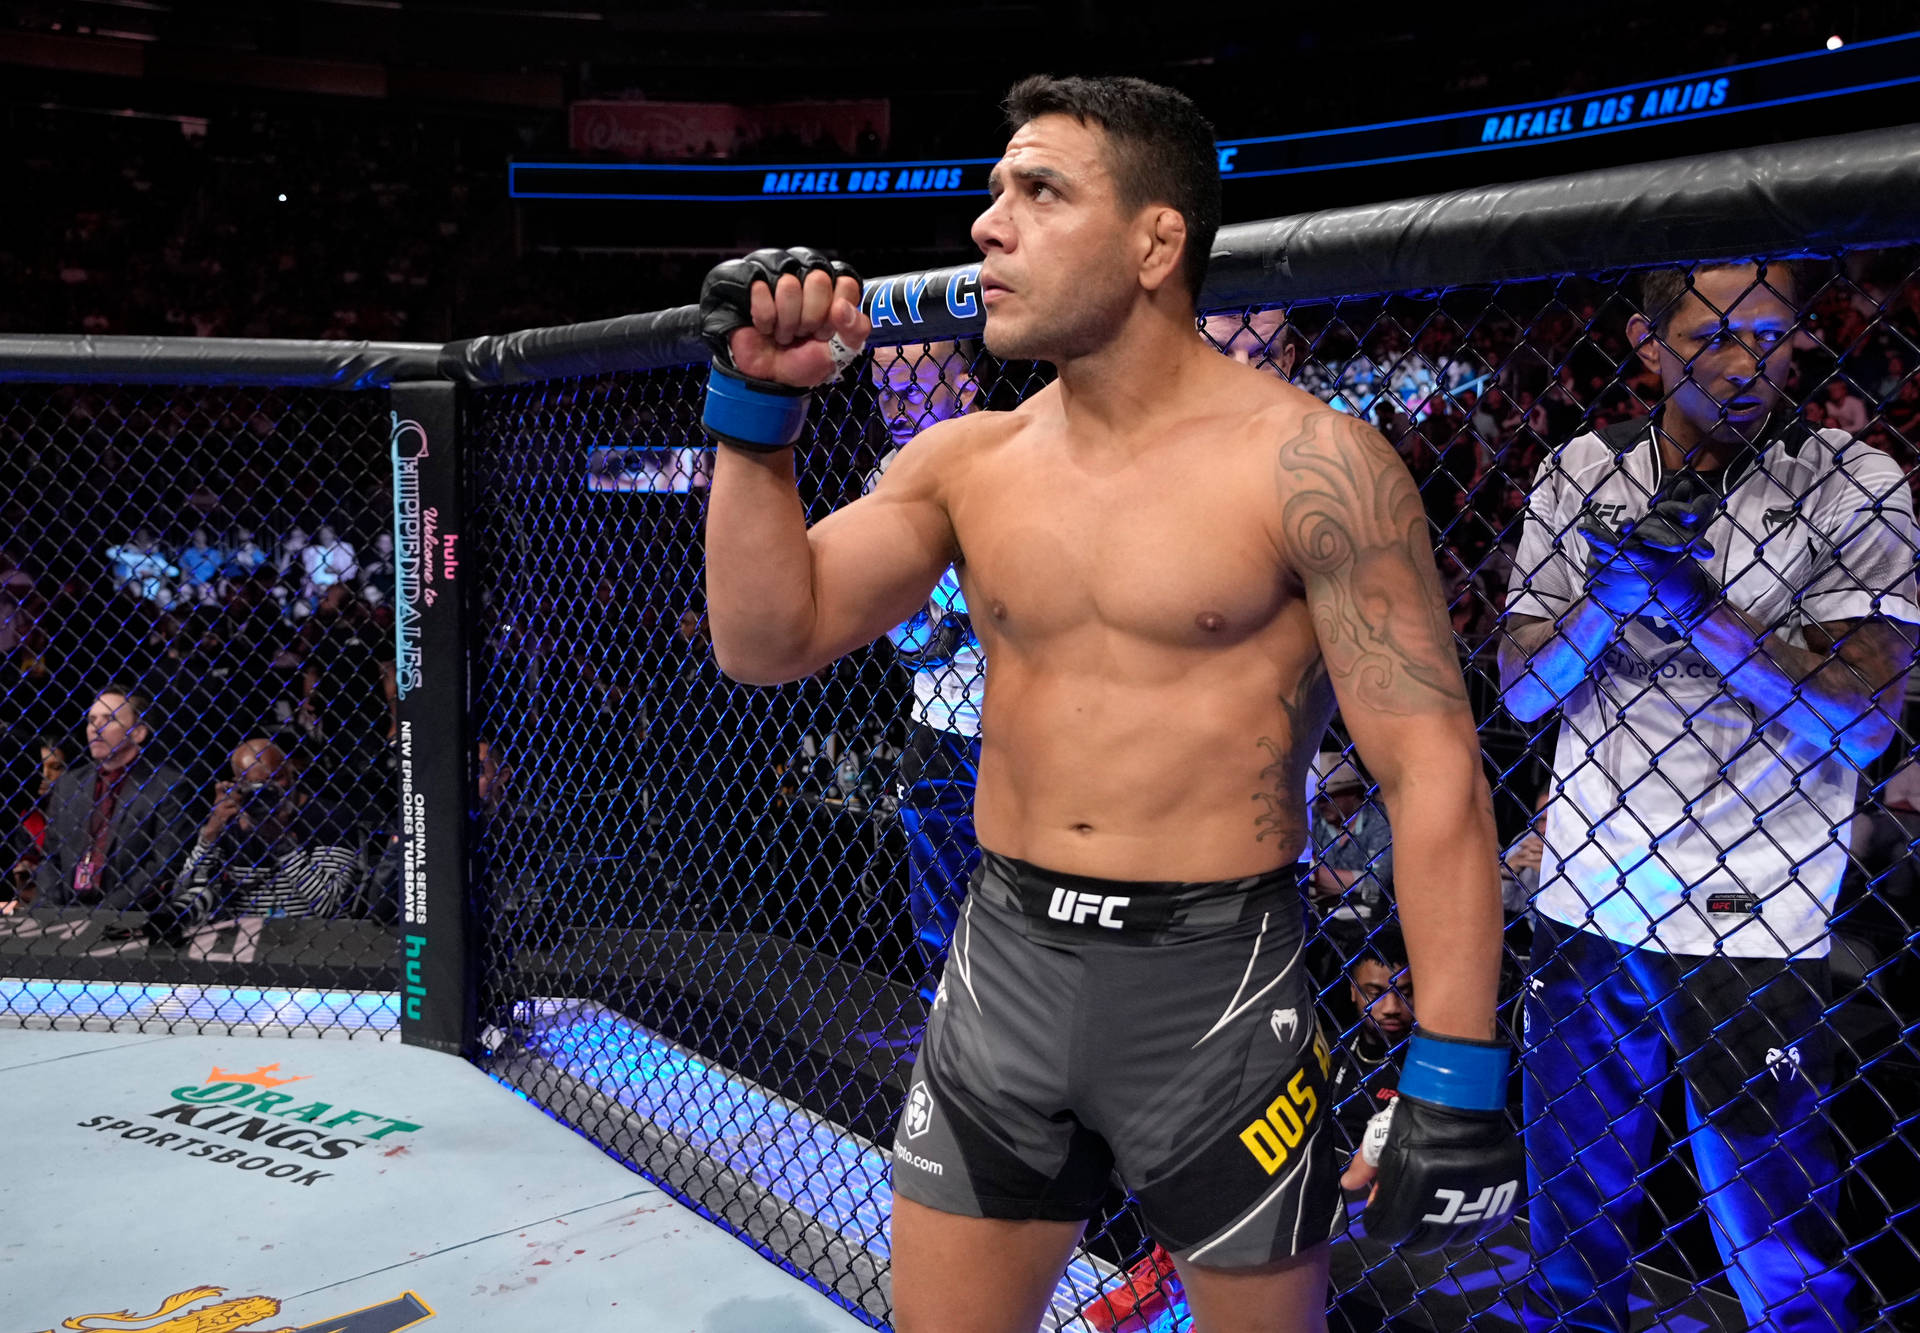 Rafael Dos Anjos Preparing For Fight Background